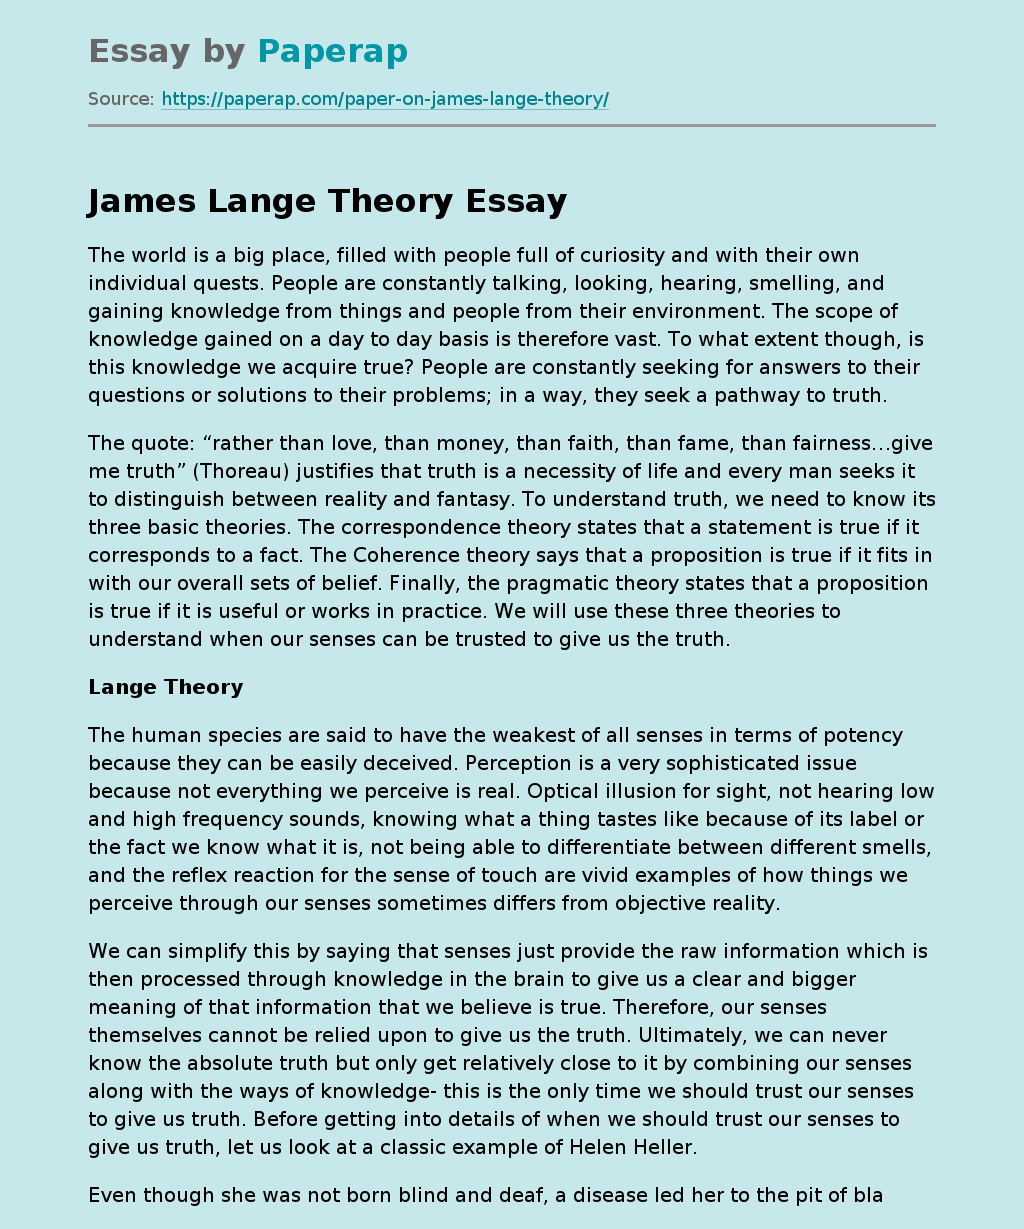 Hypothesis About the Origin and Nature of Emotions by James Lange